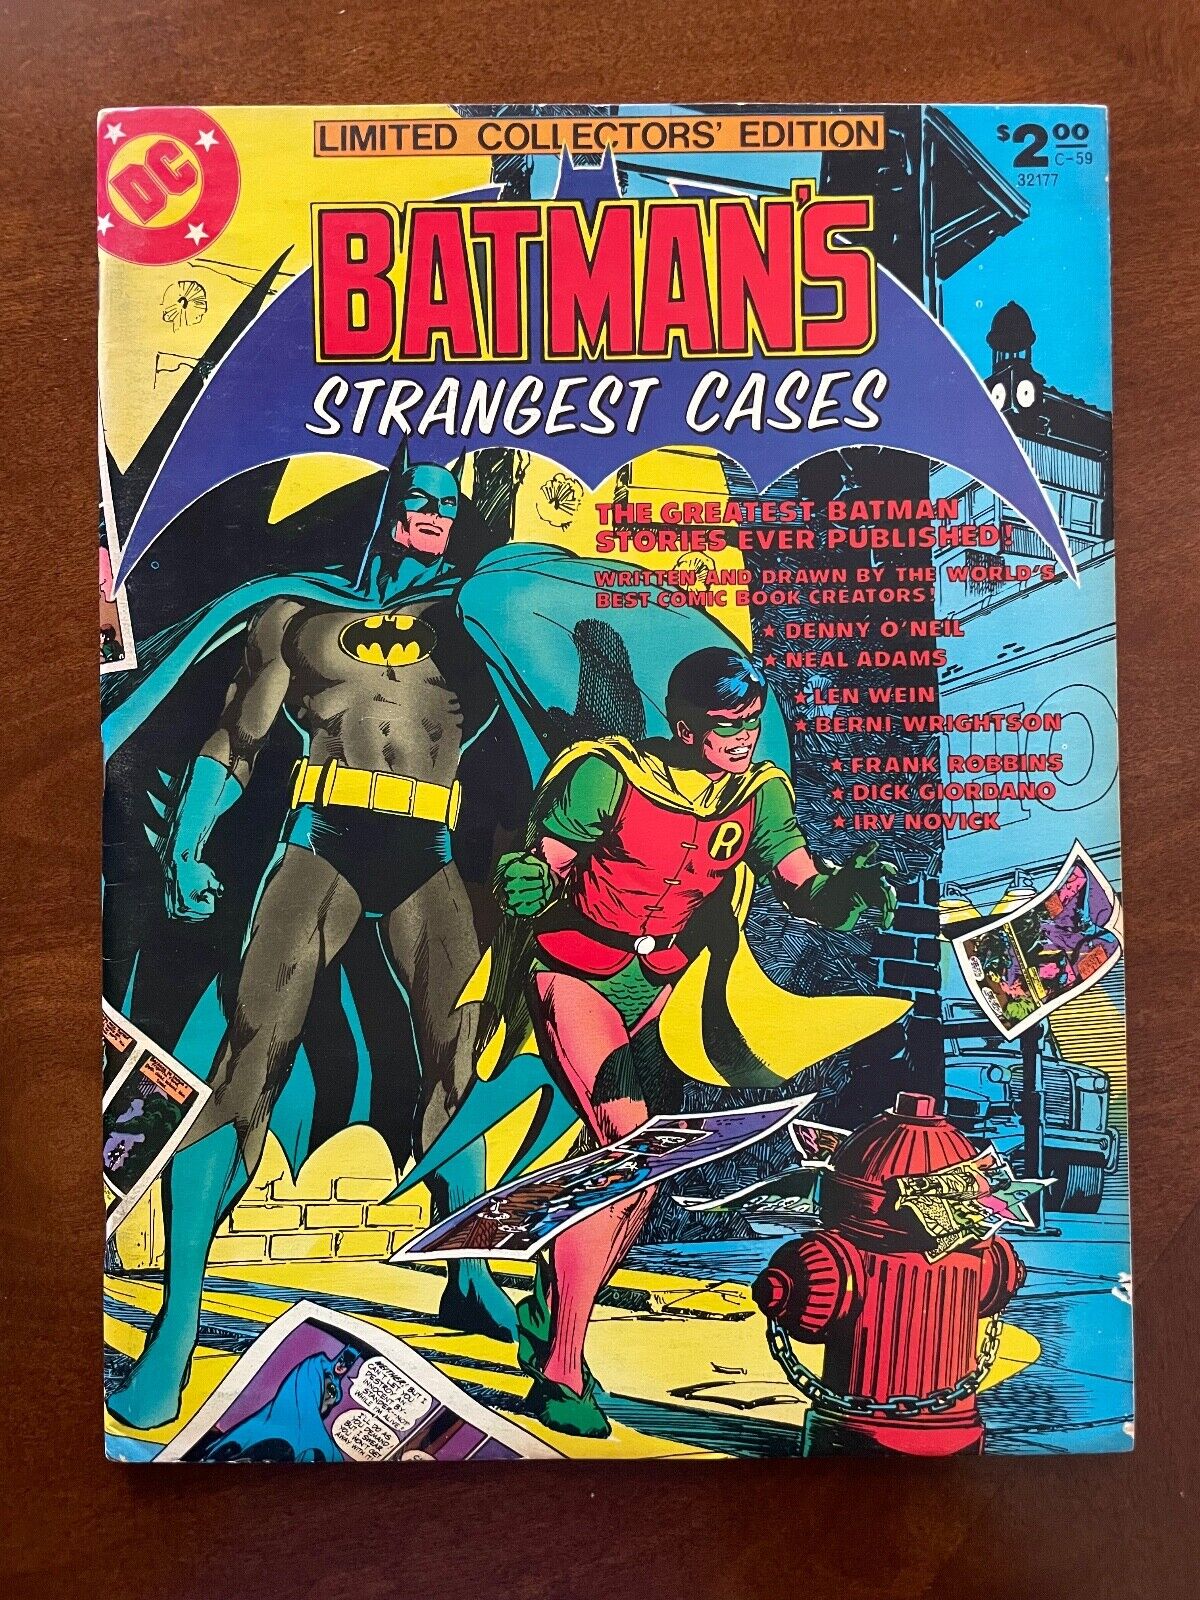 Limited Collector's Edition C-59, DC (1978), VF-(7.5) - Batman's Strangest Cases